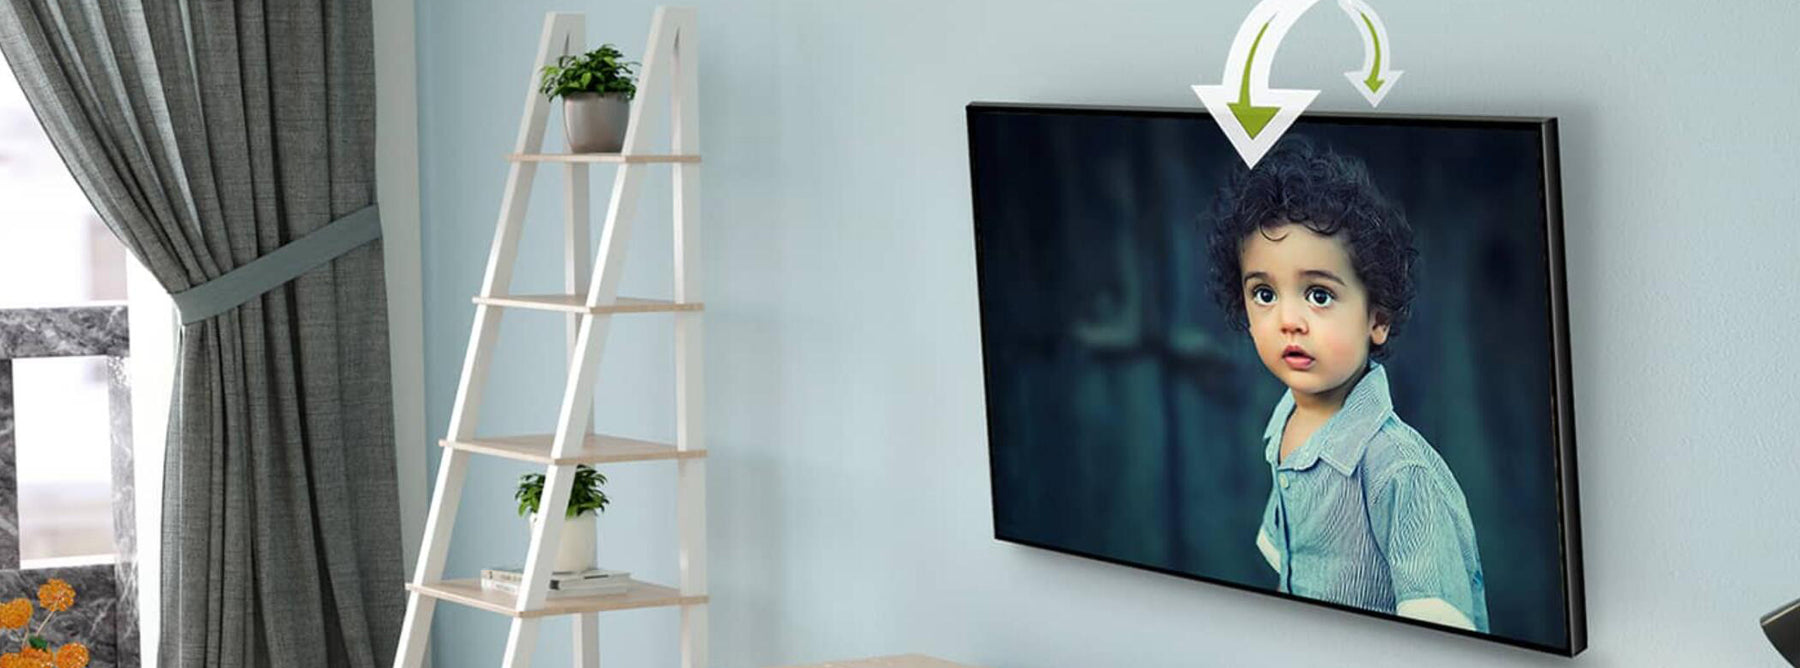 Overcoming Common Installation Challenges with Low Profile Tilt TV Mounts